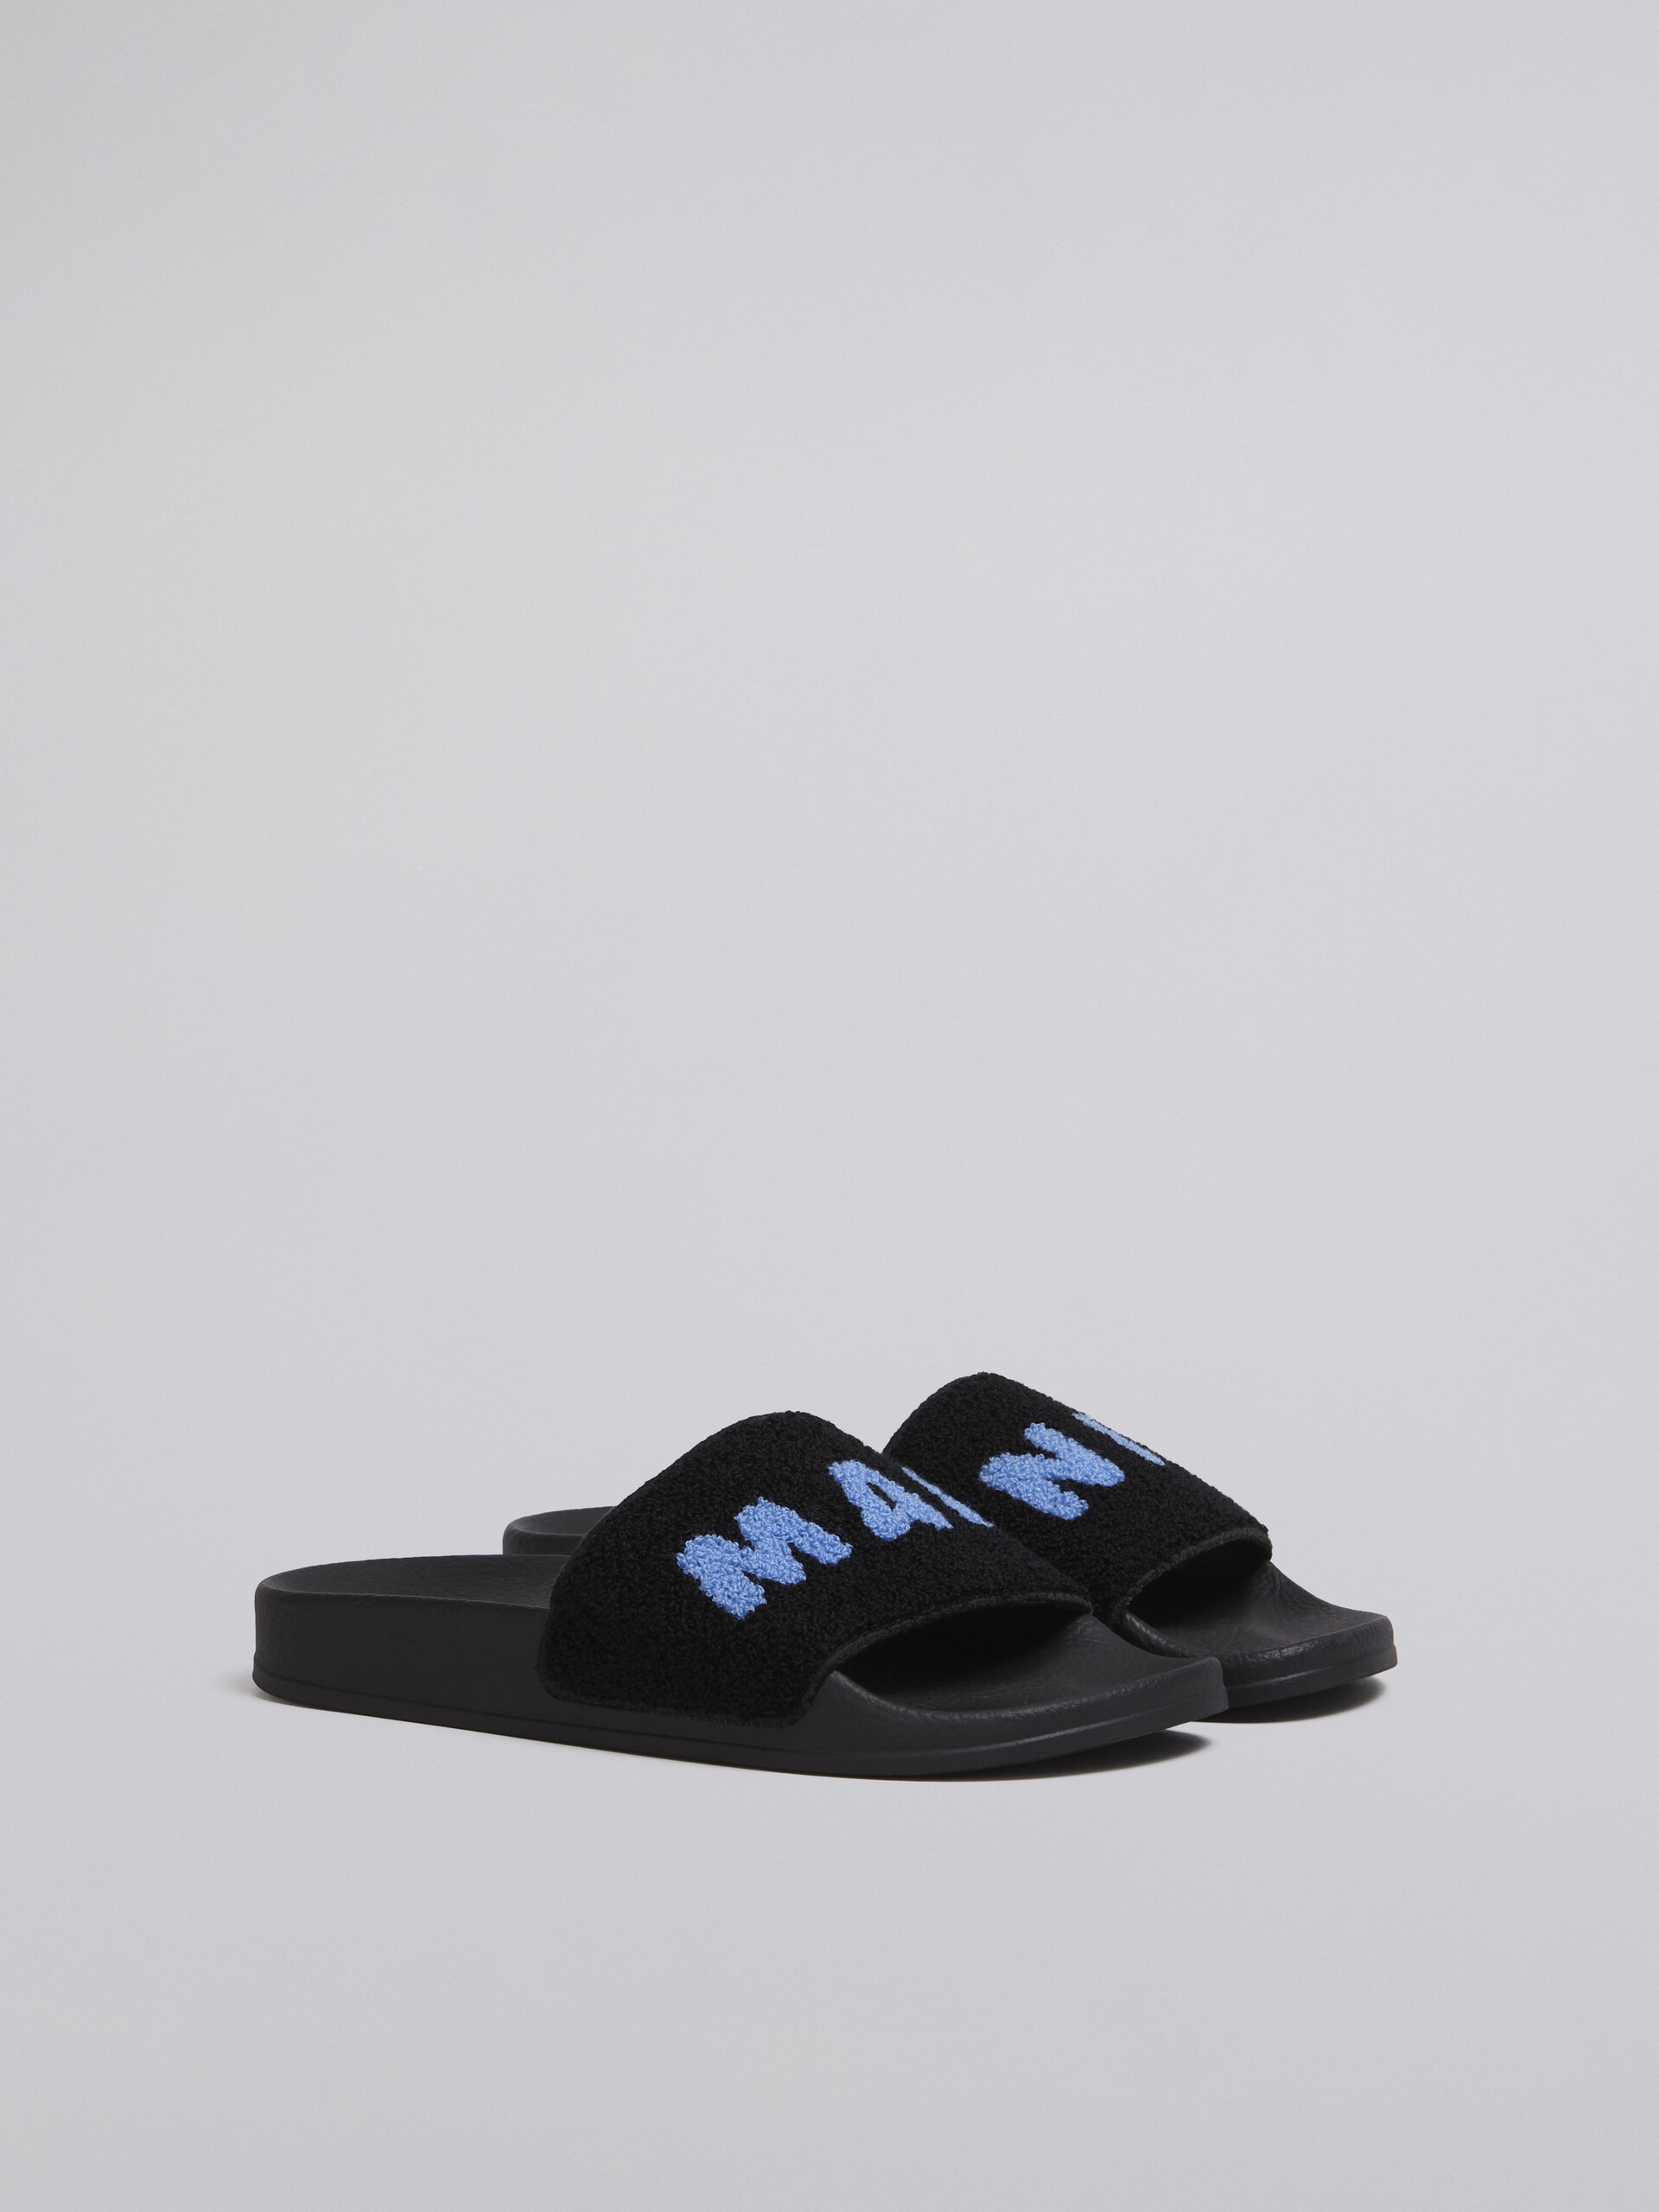 Rubber sandal with black and blue terry-cloth band - Sandals - Image 2